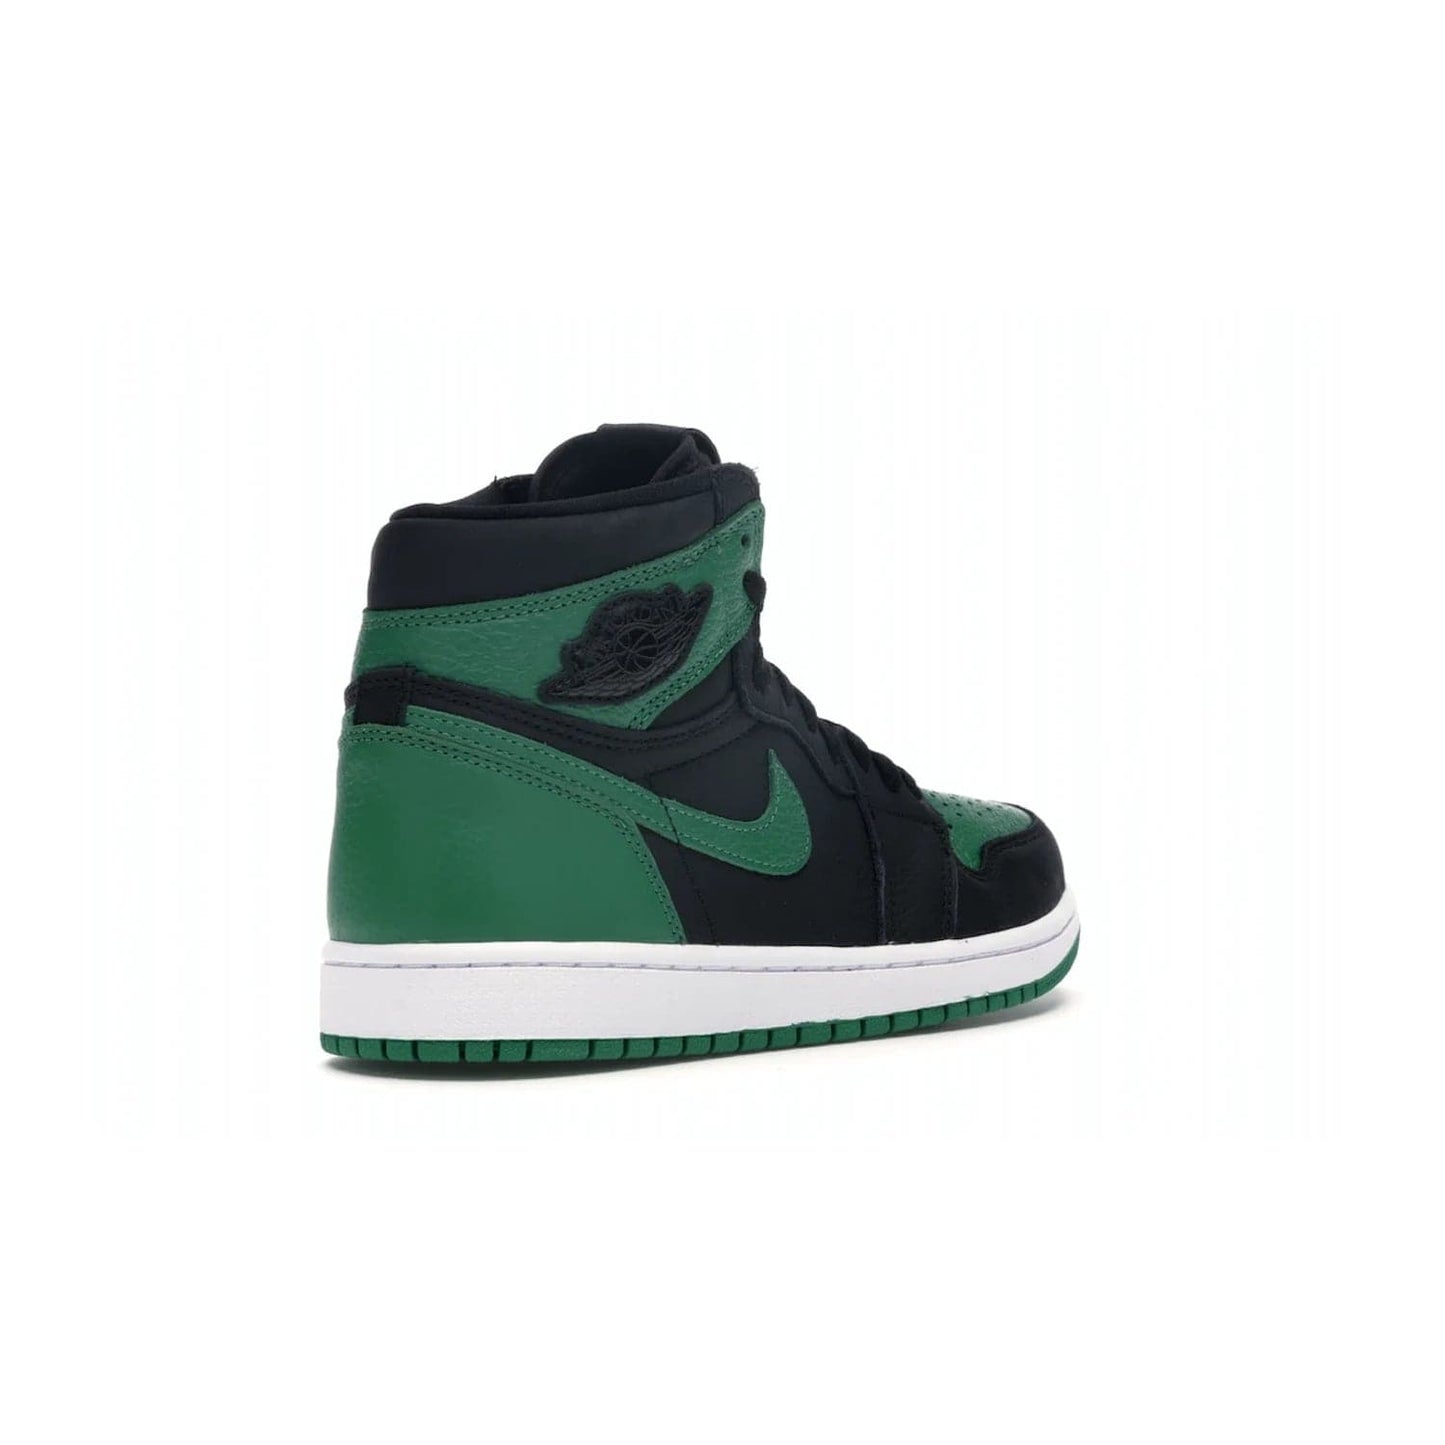 Jordan 1 Retro High Pine Green Black - Image 32 - Only at www.BallersClubKickz.com - Step into fresh style with the Jordan 1 Retro High Pine Green Black. Combining a black tumbled leather upper with green leather overlays, this sneaker features a Gym Red embroidered tongue tag, sail midsole, and pine green outsole for iconic style with a unique twist.